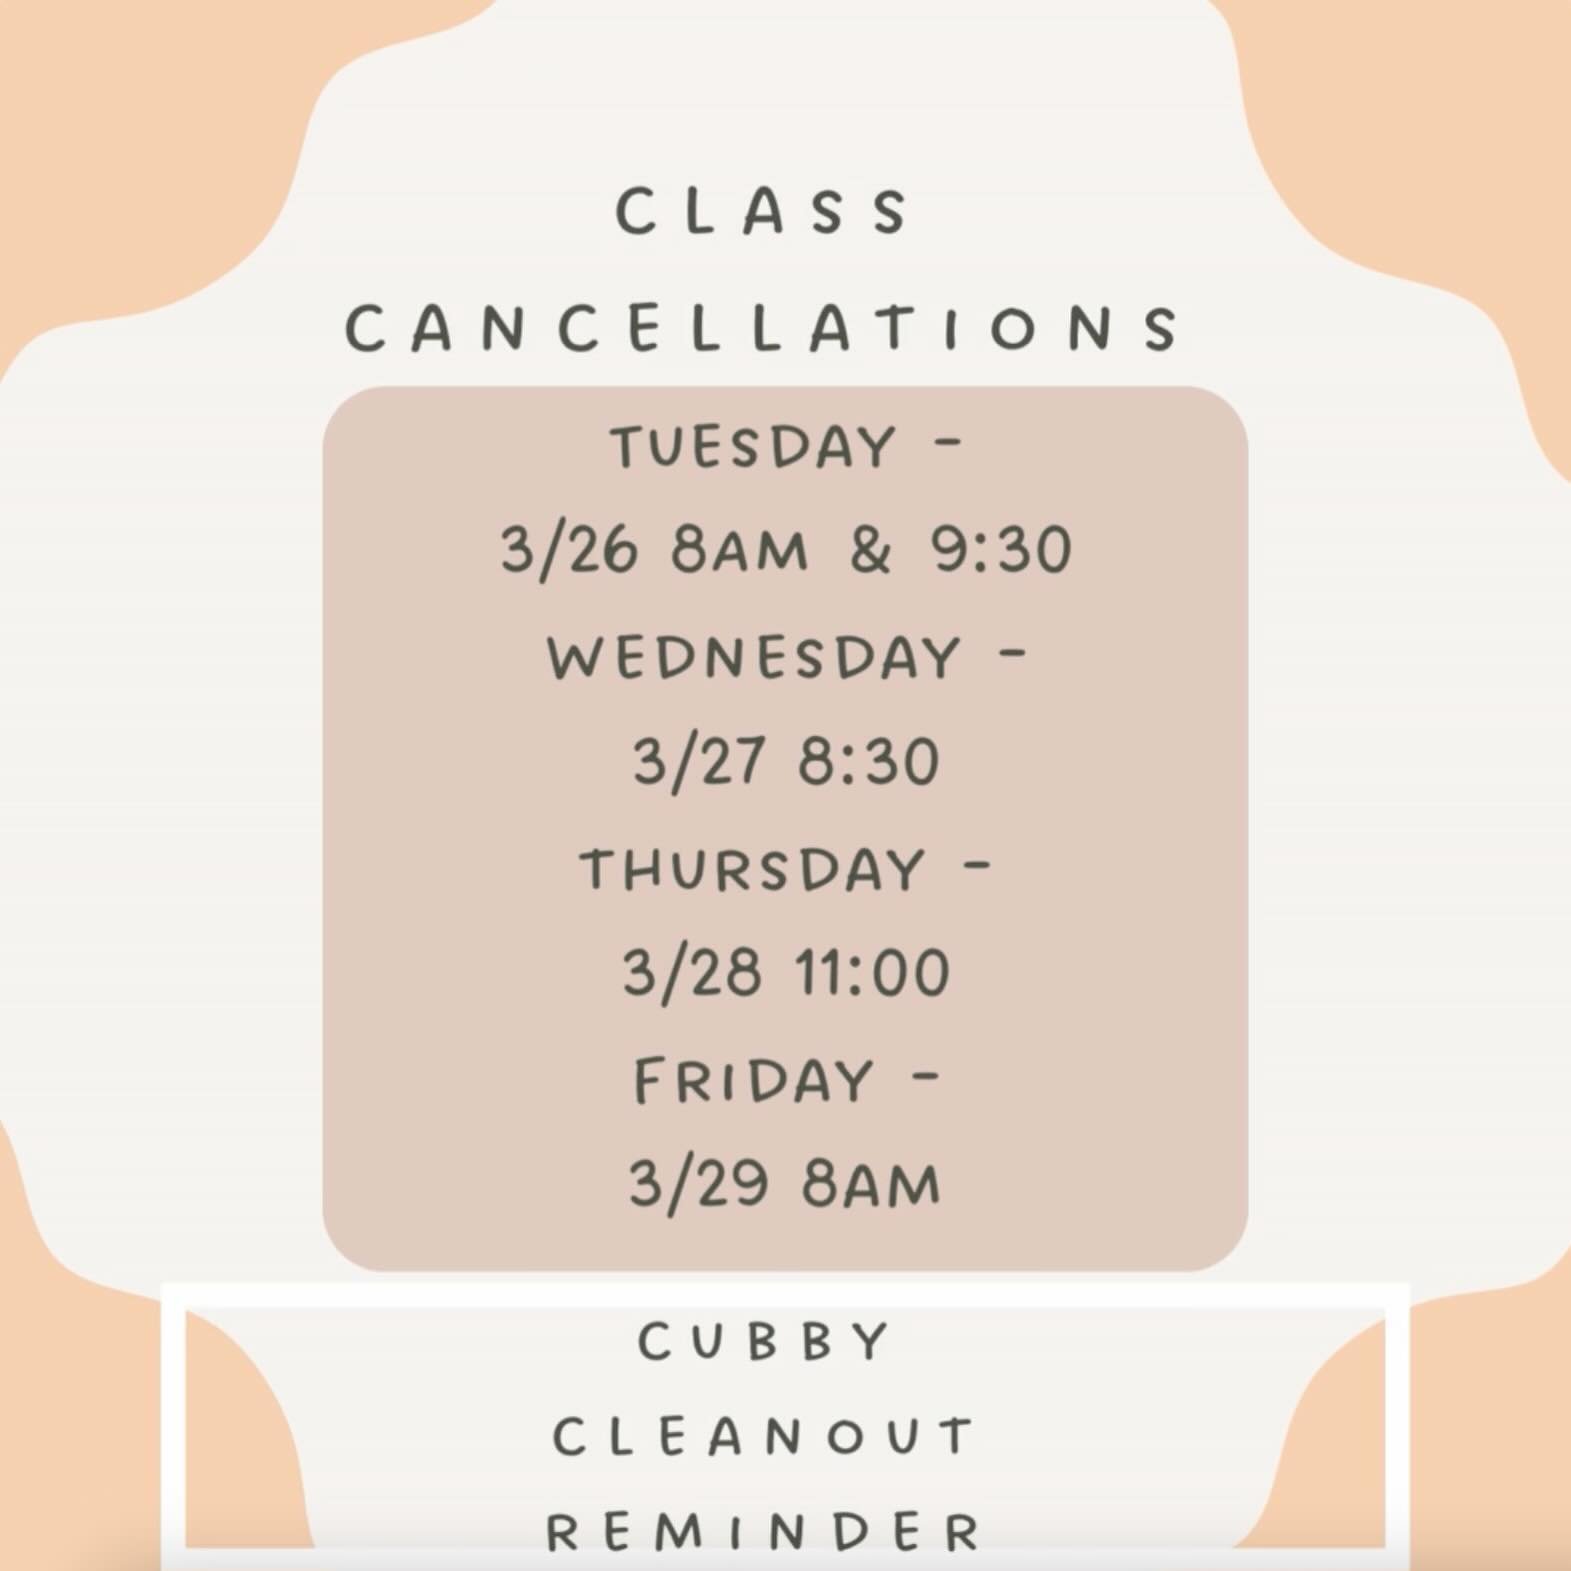 Happy Sunday Ethos family ♡ 

A few housekeeping items to be aware of this week, including class cancellations so please read through fully! 

🌀@nickivaughn is on spring break with her family this week. Full body fusion, cardio &amp; strength &amp; 